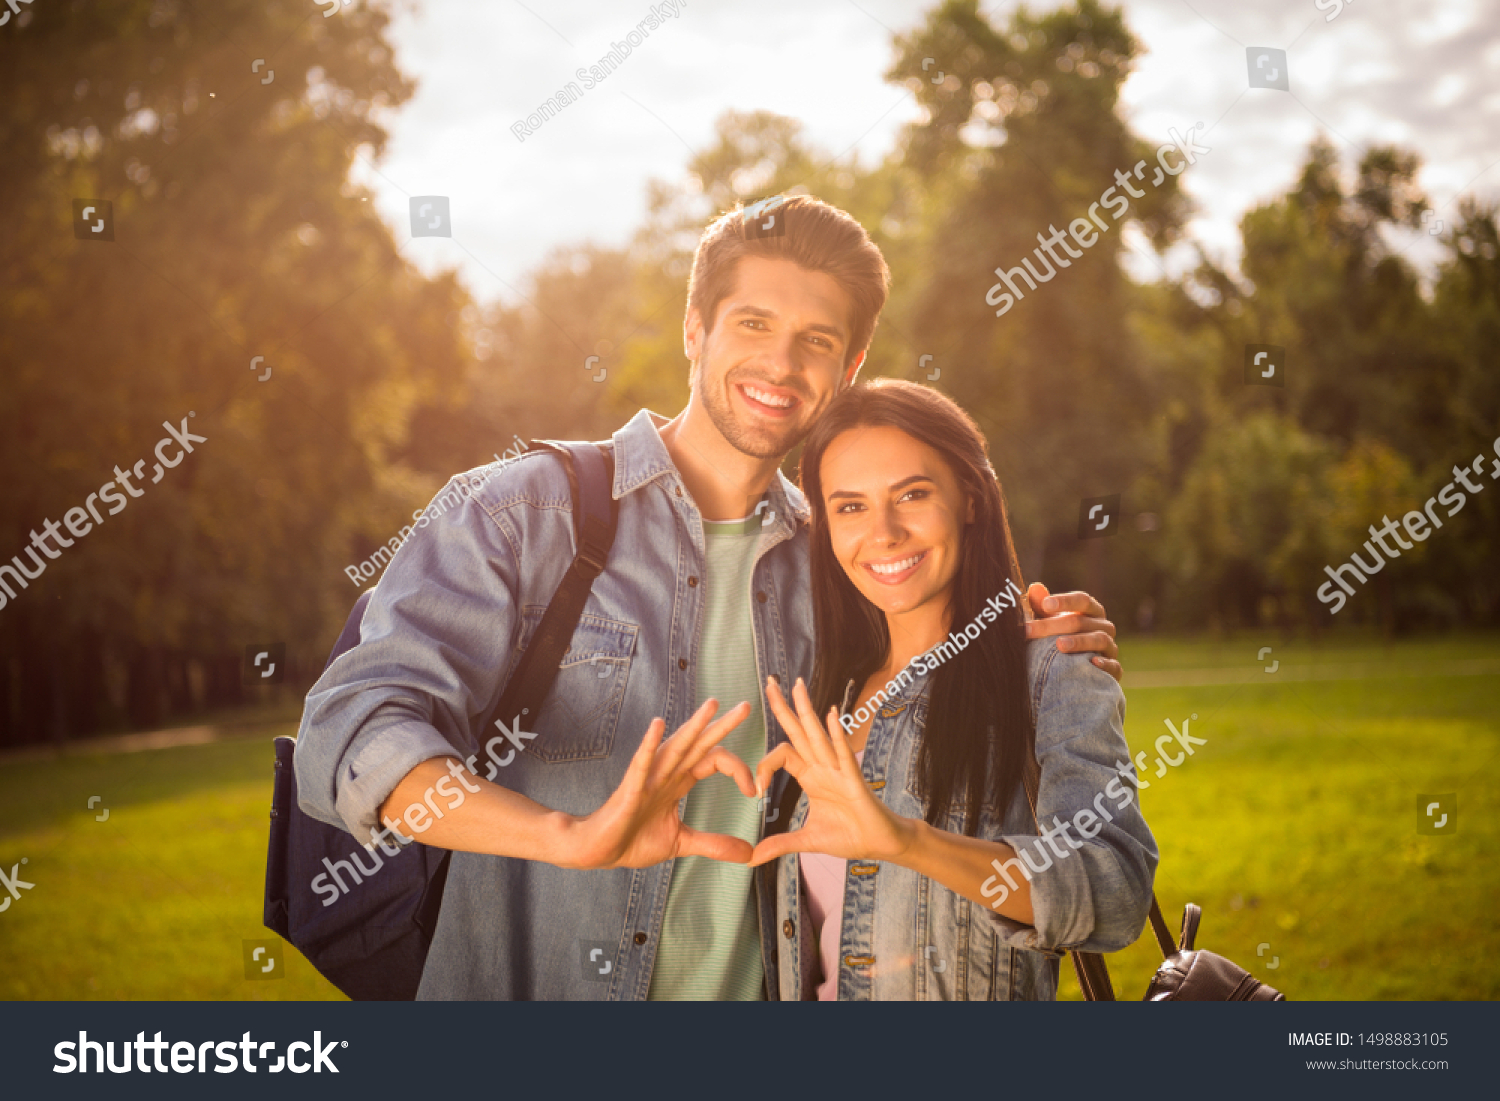 Portrait of his he her she nice attractive cheerful sweet tender amorous affectionate married spouses tourists showing heart shape gathering in green wood forest shiny day sun light #1498883105